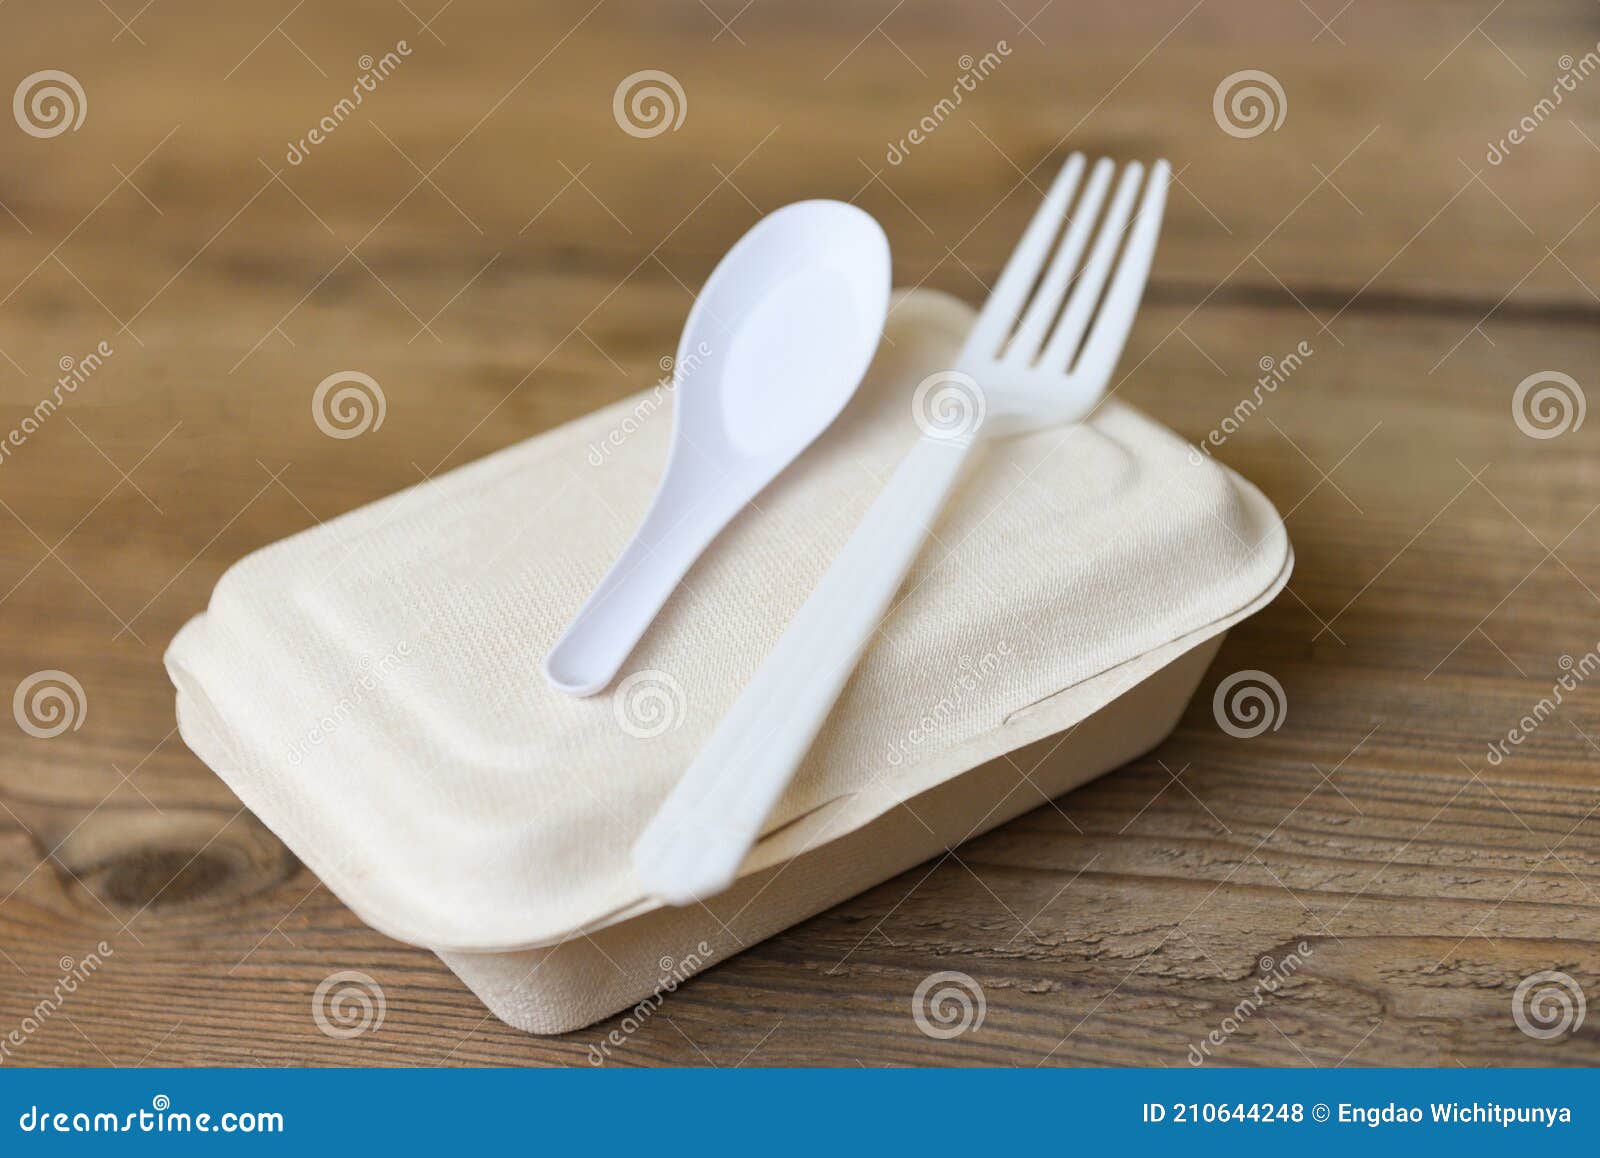 Service Food Order Online Delivery Food Box, Delivery in Take Away Boxes,  Disposable Eco Friendly Packaging Containers with Spoon Stock Photo - Image  of dinner, brown: 210644248